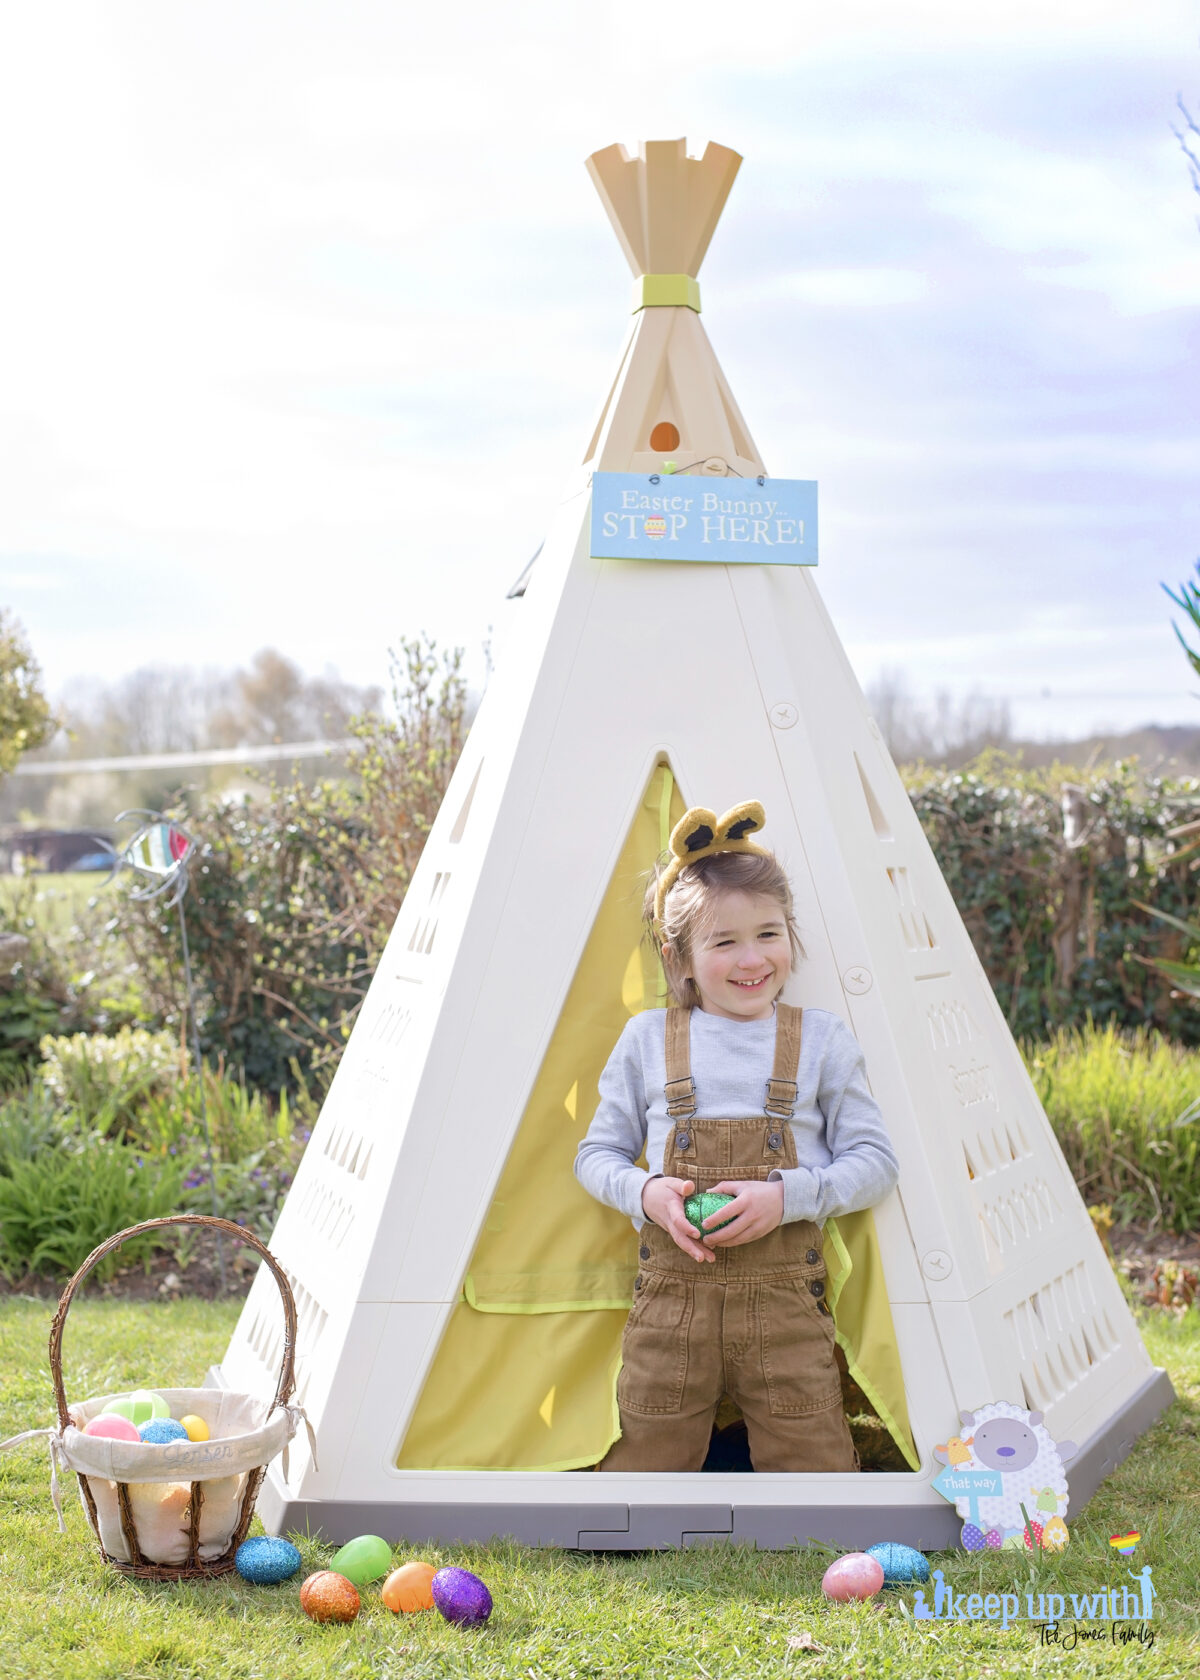 Image shows the new SmobyUK Teepee, available on Amazon, in the garden. The teepee is cream, white and green with a triangle pattern on the sides.  There is a fabric door which is lime green and a little boy aged 6 is stood in the doorway, dressed in light tan dungarees and a pale blue top, and wearing grey and pink bunny ears for easter.   He is laughing.  There is an easter baskets filled with coloured easter eggs which have spilled onto the floor.  The teepee is decorated with a sign which reads Easter Bunny Stop here!